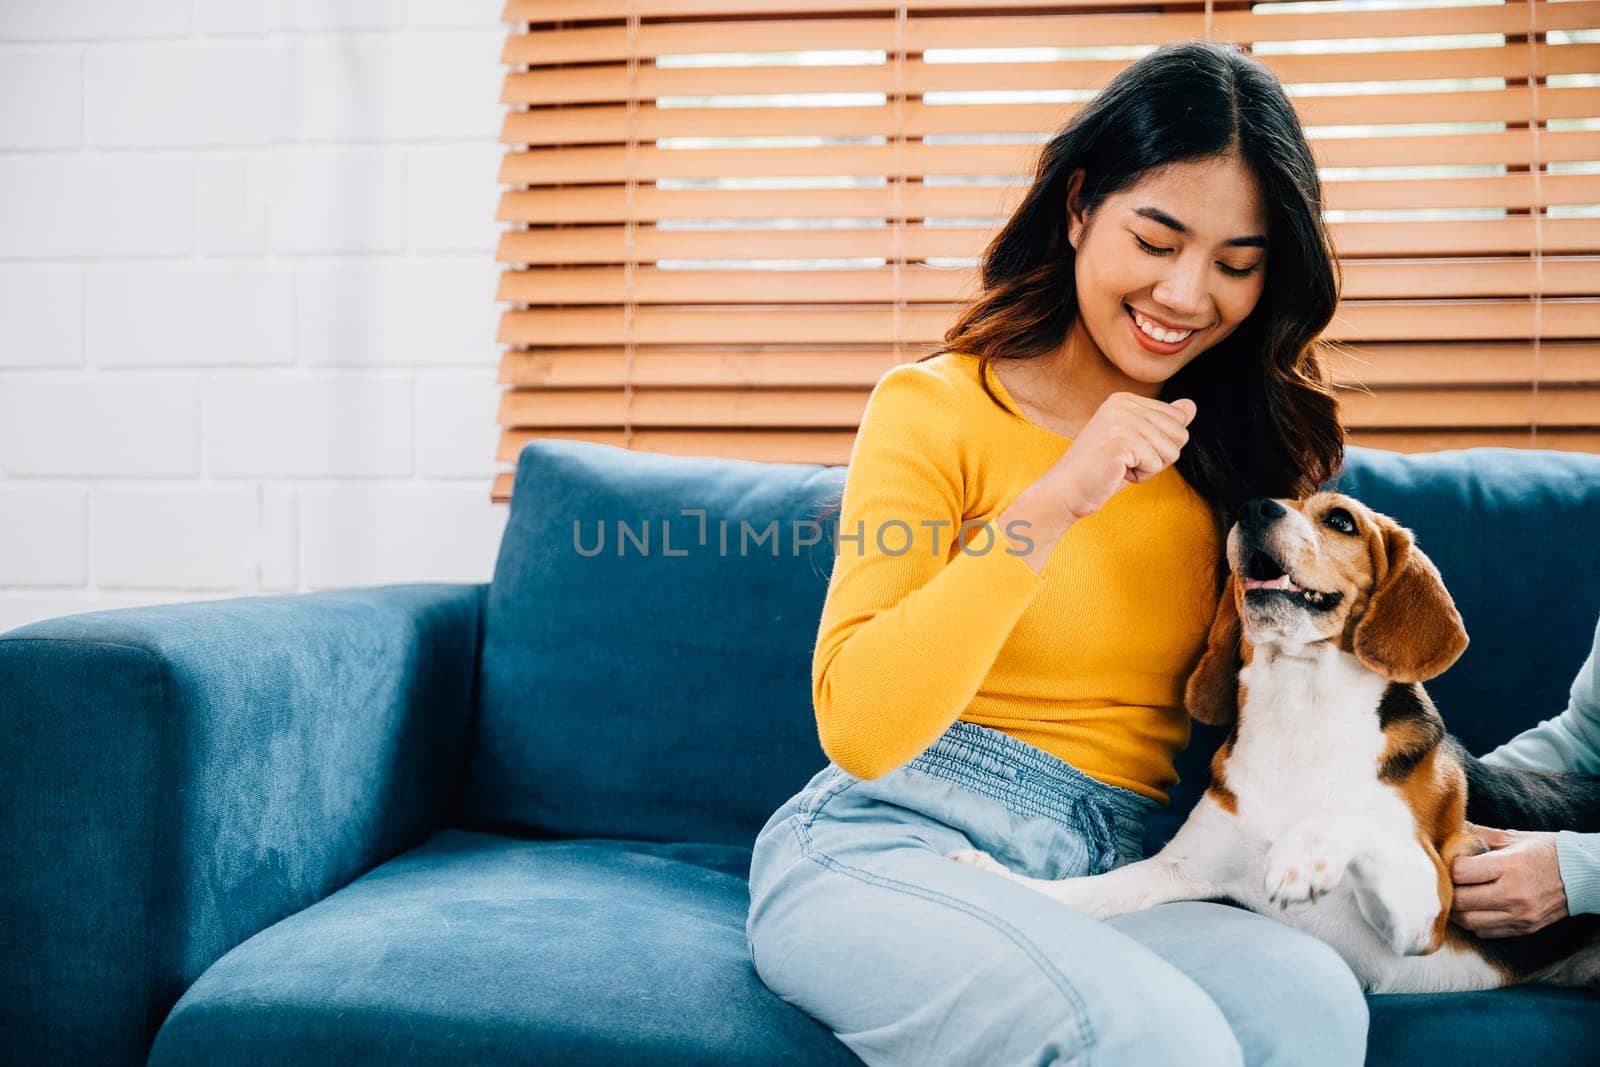 In an affectionate family portrait, a woman and her mother enjoy a bonding session with their Beagle dog on the sofa. Their love and loyalty shine through in their smiles. Pet love